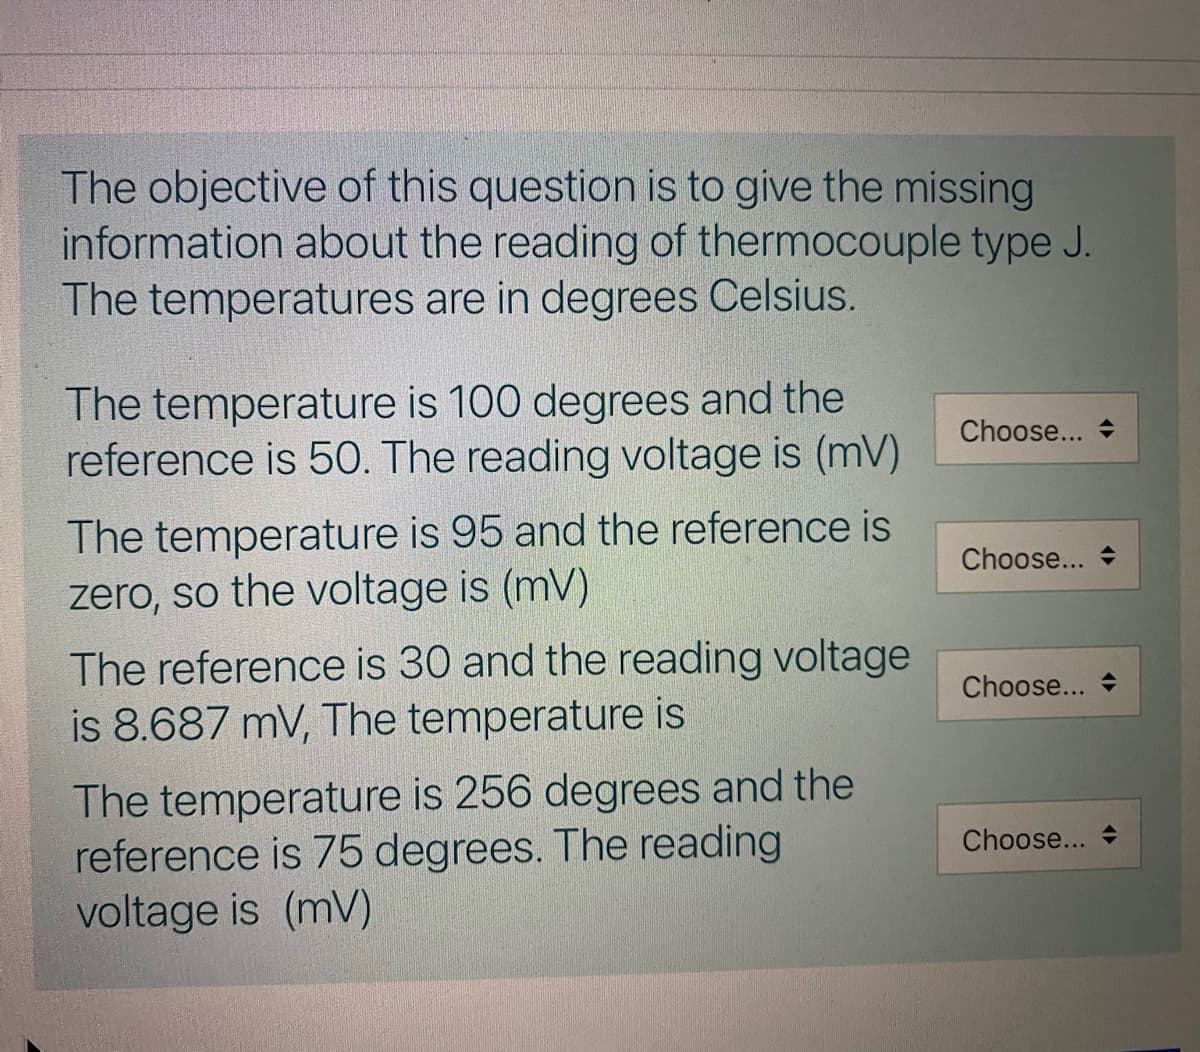 The objective of this question is to give the missing
information about the reading of thermocouple type J.
The temperatures are in degrees Celsius.
The temperature is 100 degrees and the
reference is 50. The reading voltage is (mV)
Choose...
The temperature is 95 and the reference is
zero, so the voltage is (mV)
Choose...
The reference is 30 and the reading voltage
is 8.687 mV, The temperature is
Choose... +
The temperature is 256 degrees and the
reference is 75 degrees. The reading
voltage is (mV)
Choose... +
